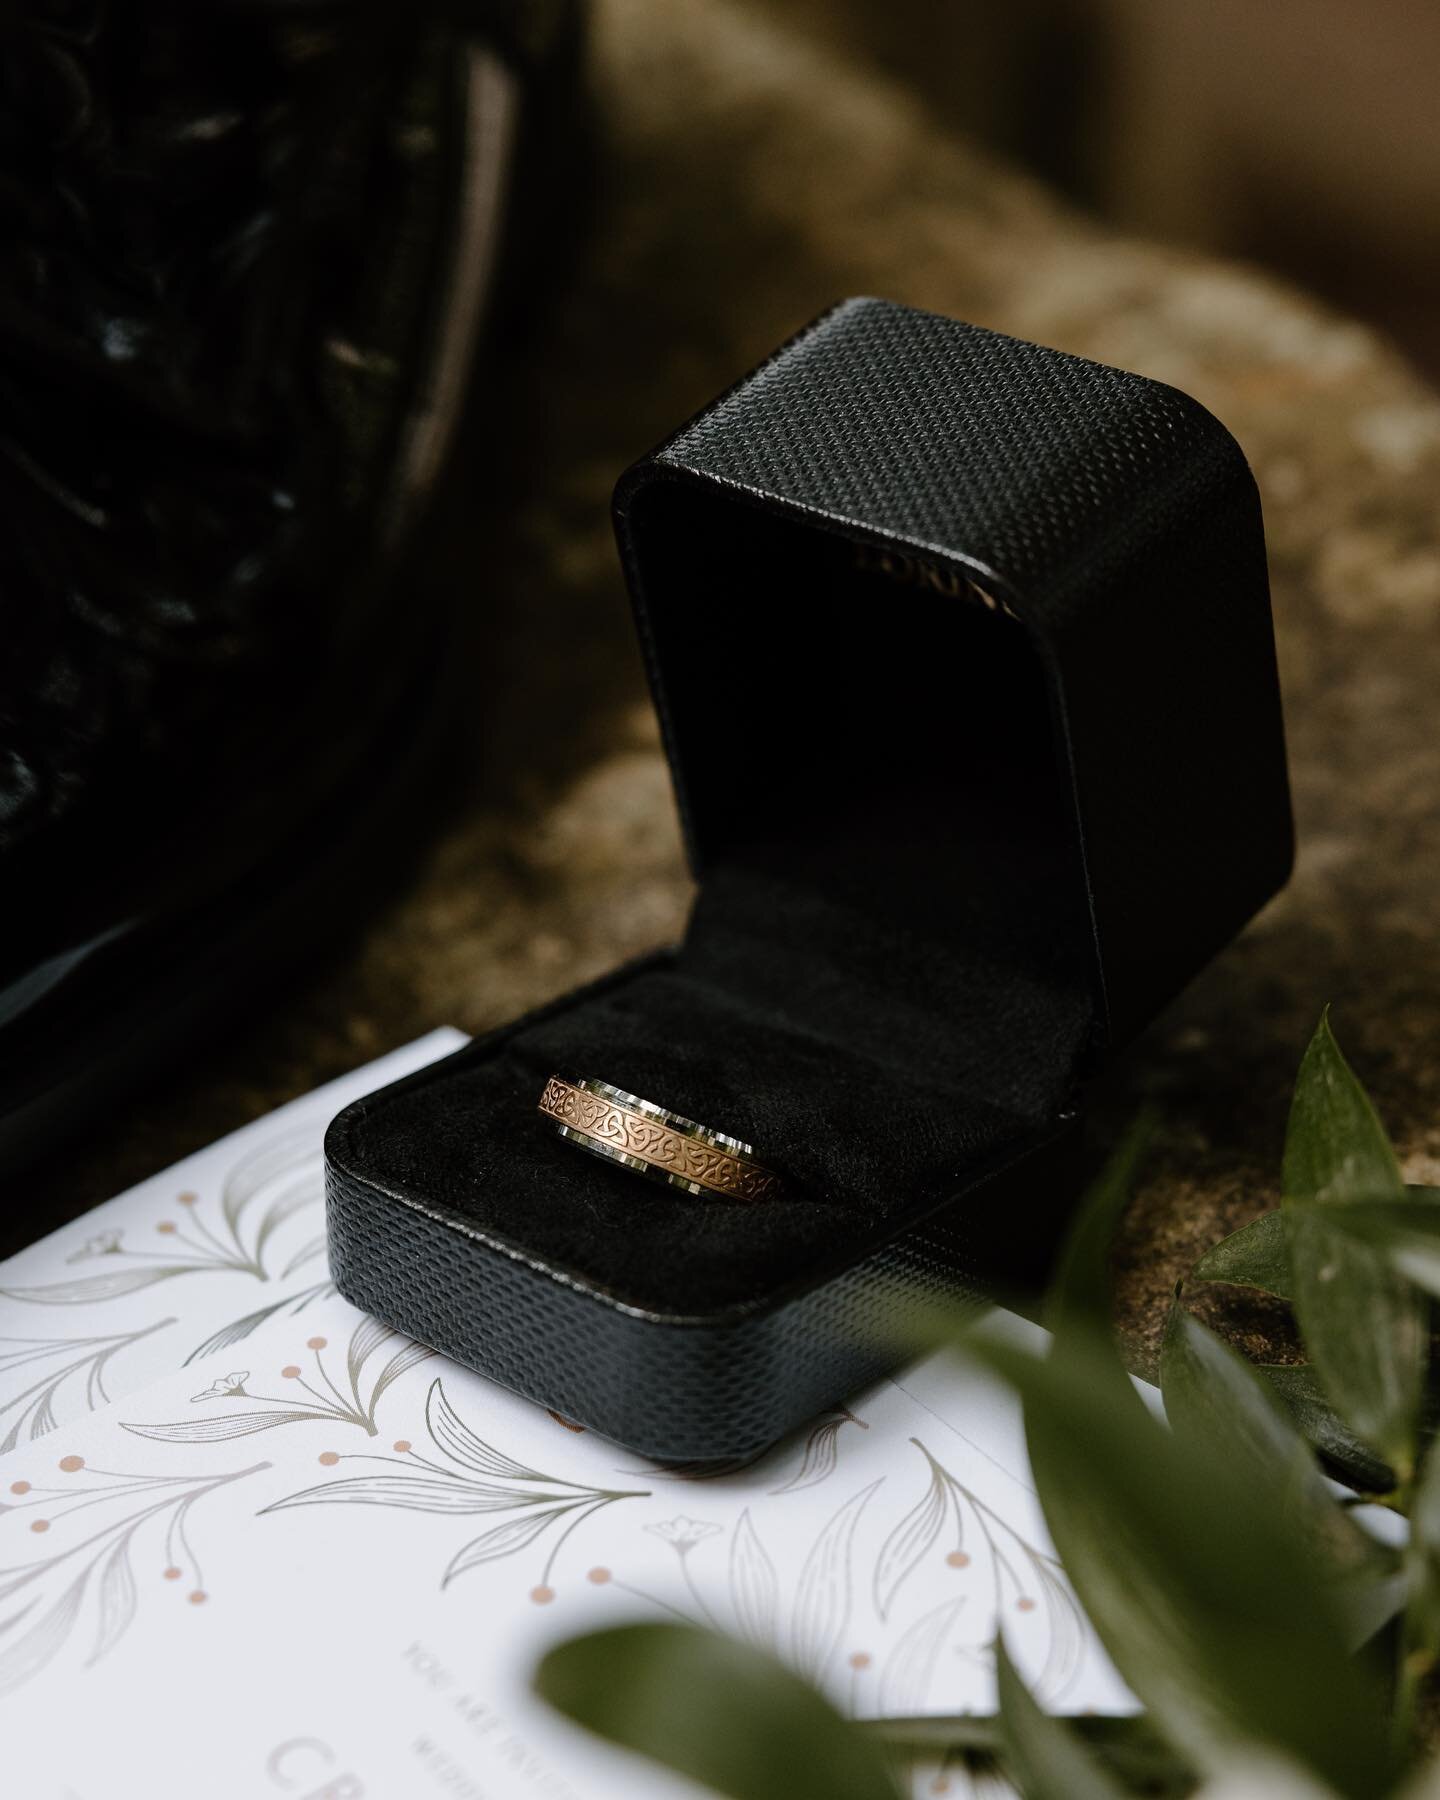 A moment for the level of detail on this ring 🖤